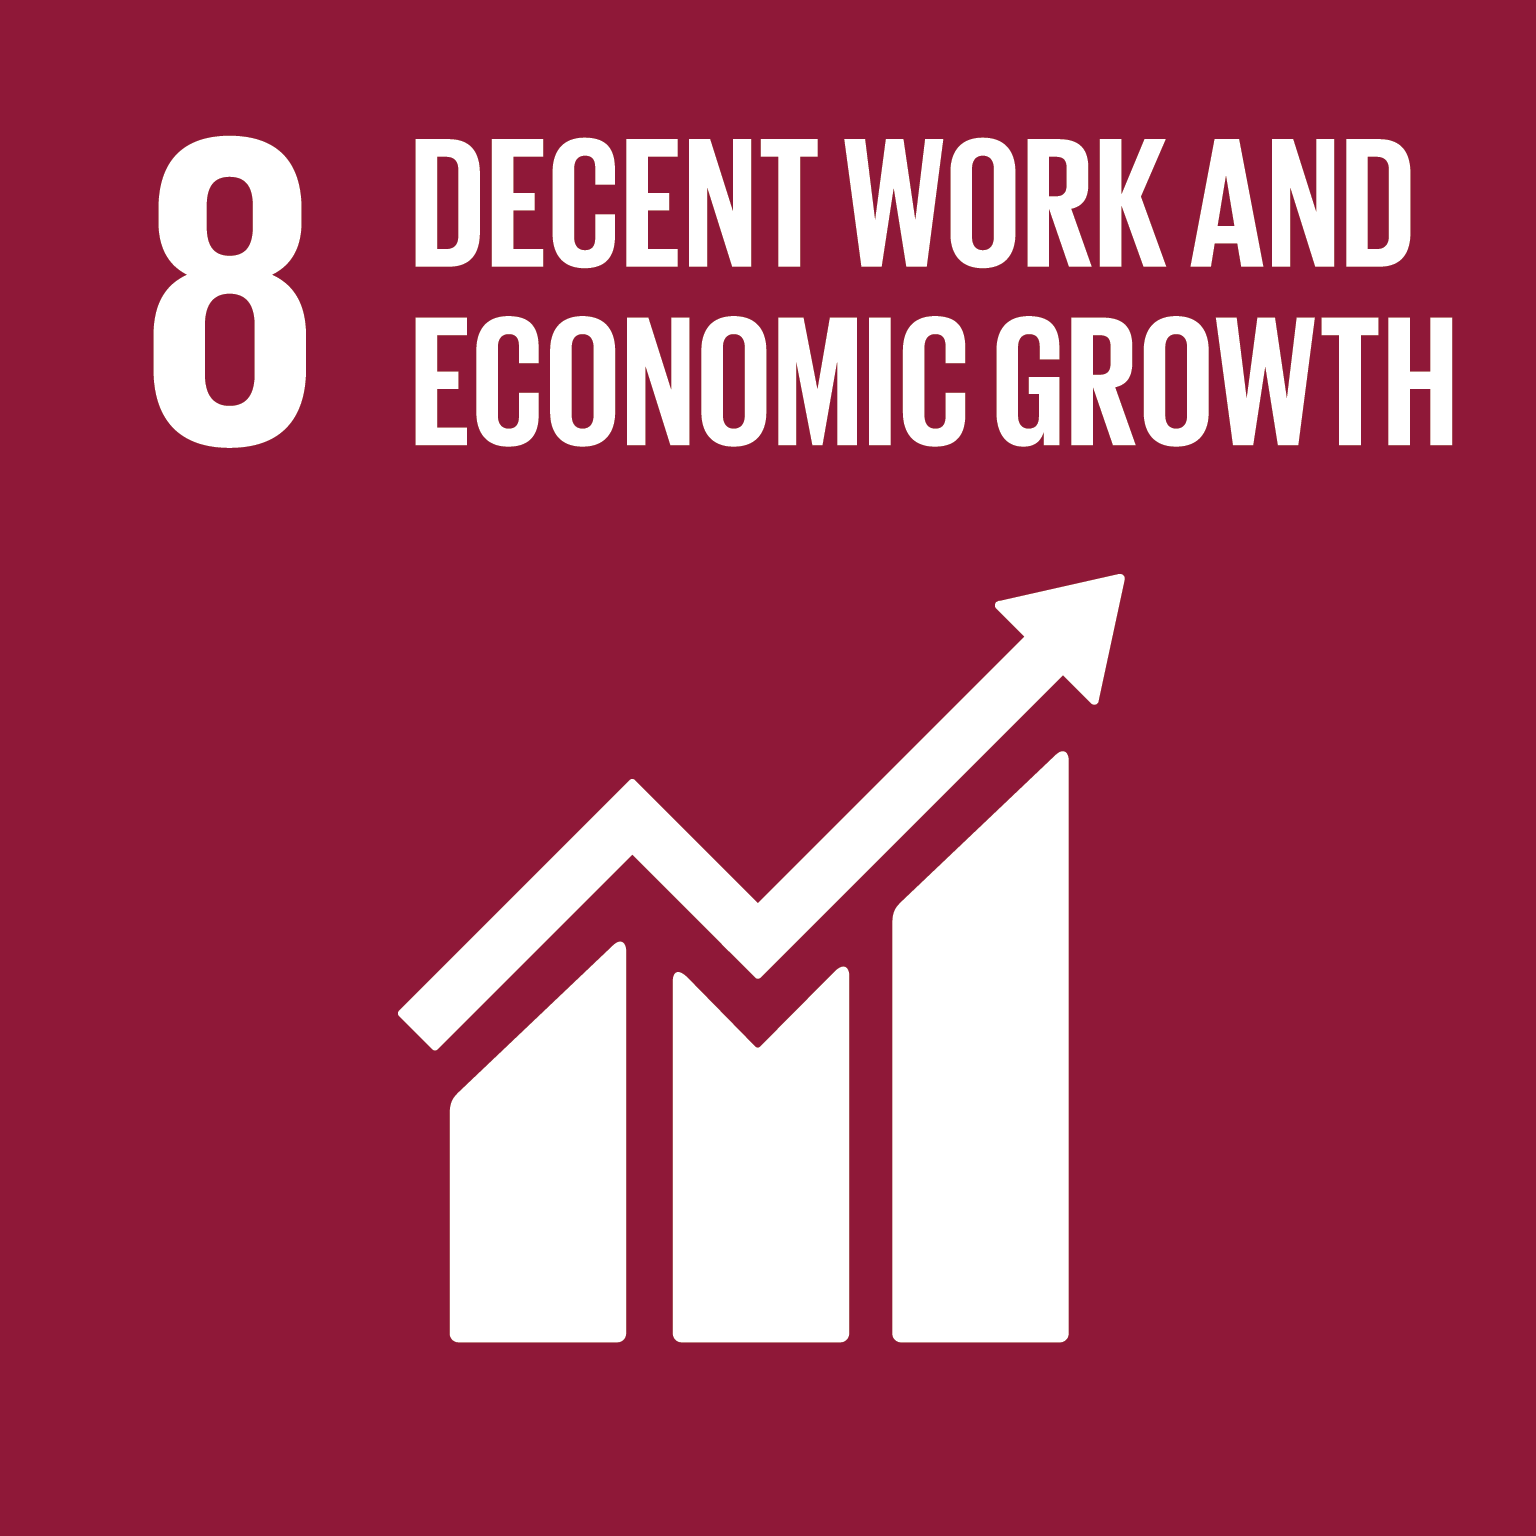 Chiefly - We are commited to the un sustainable goal of decent work and economic growth